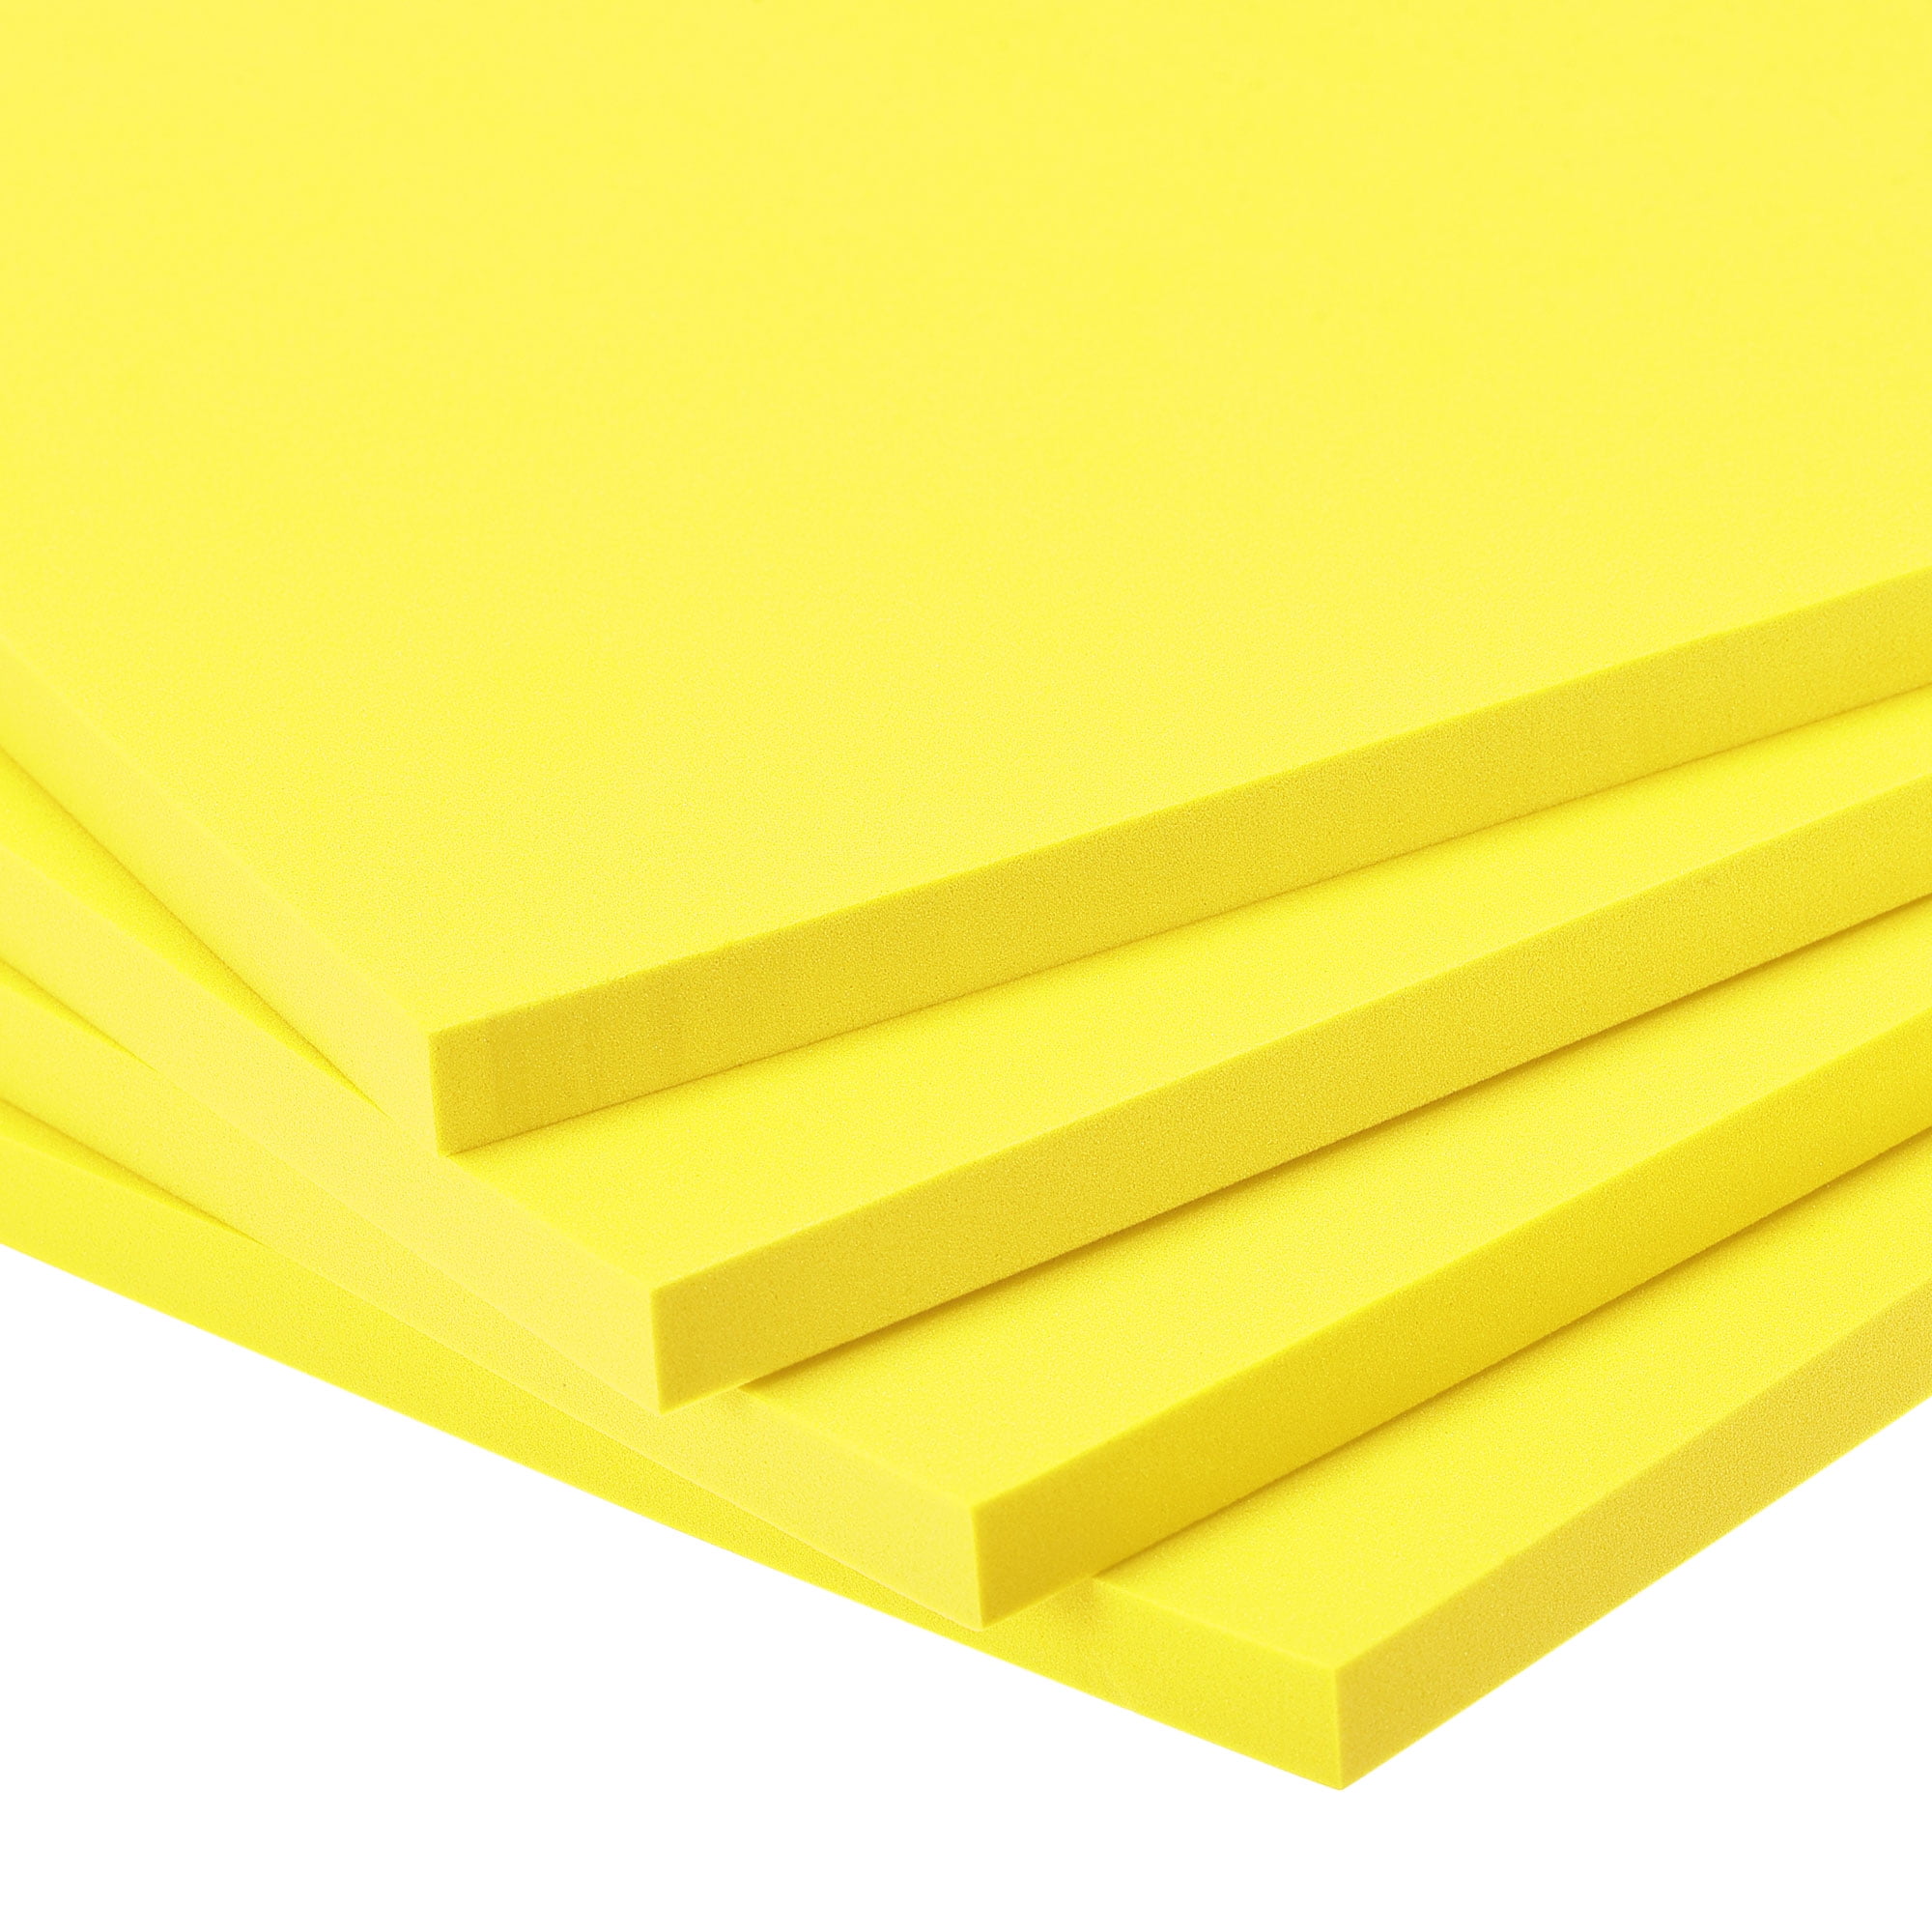 Yellow EVA Foam Sheets, 2mm Thick, 6 x 9 Inch, Handicraft Foam Paper for  Arts and Crafts, by Ader Products - 12 Sheets